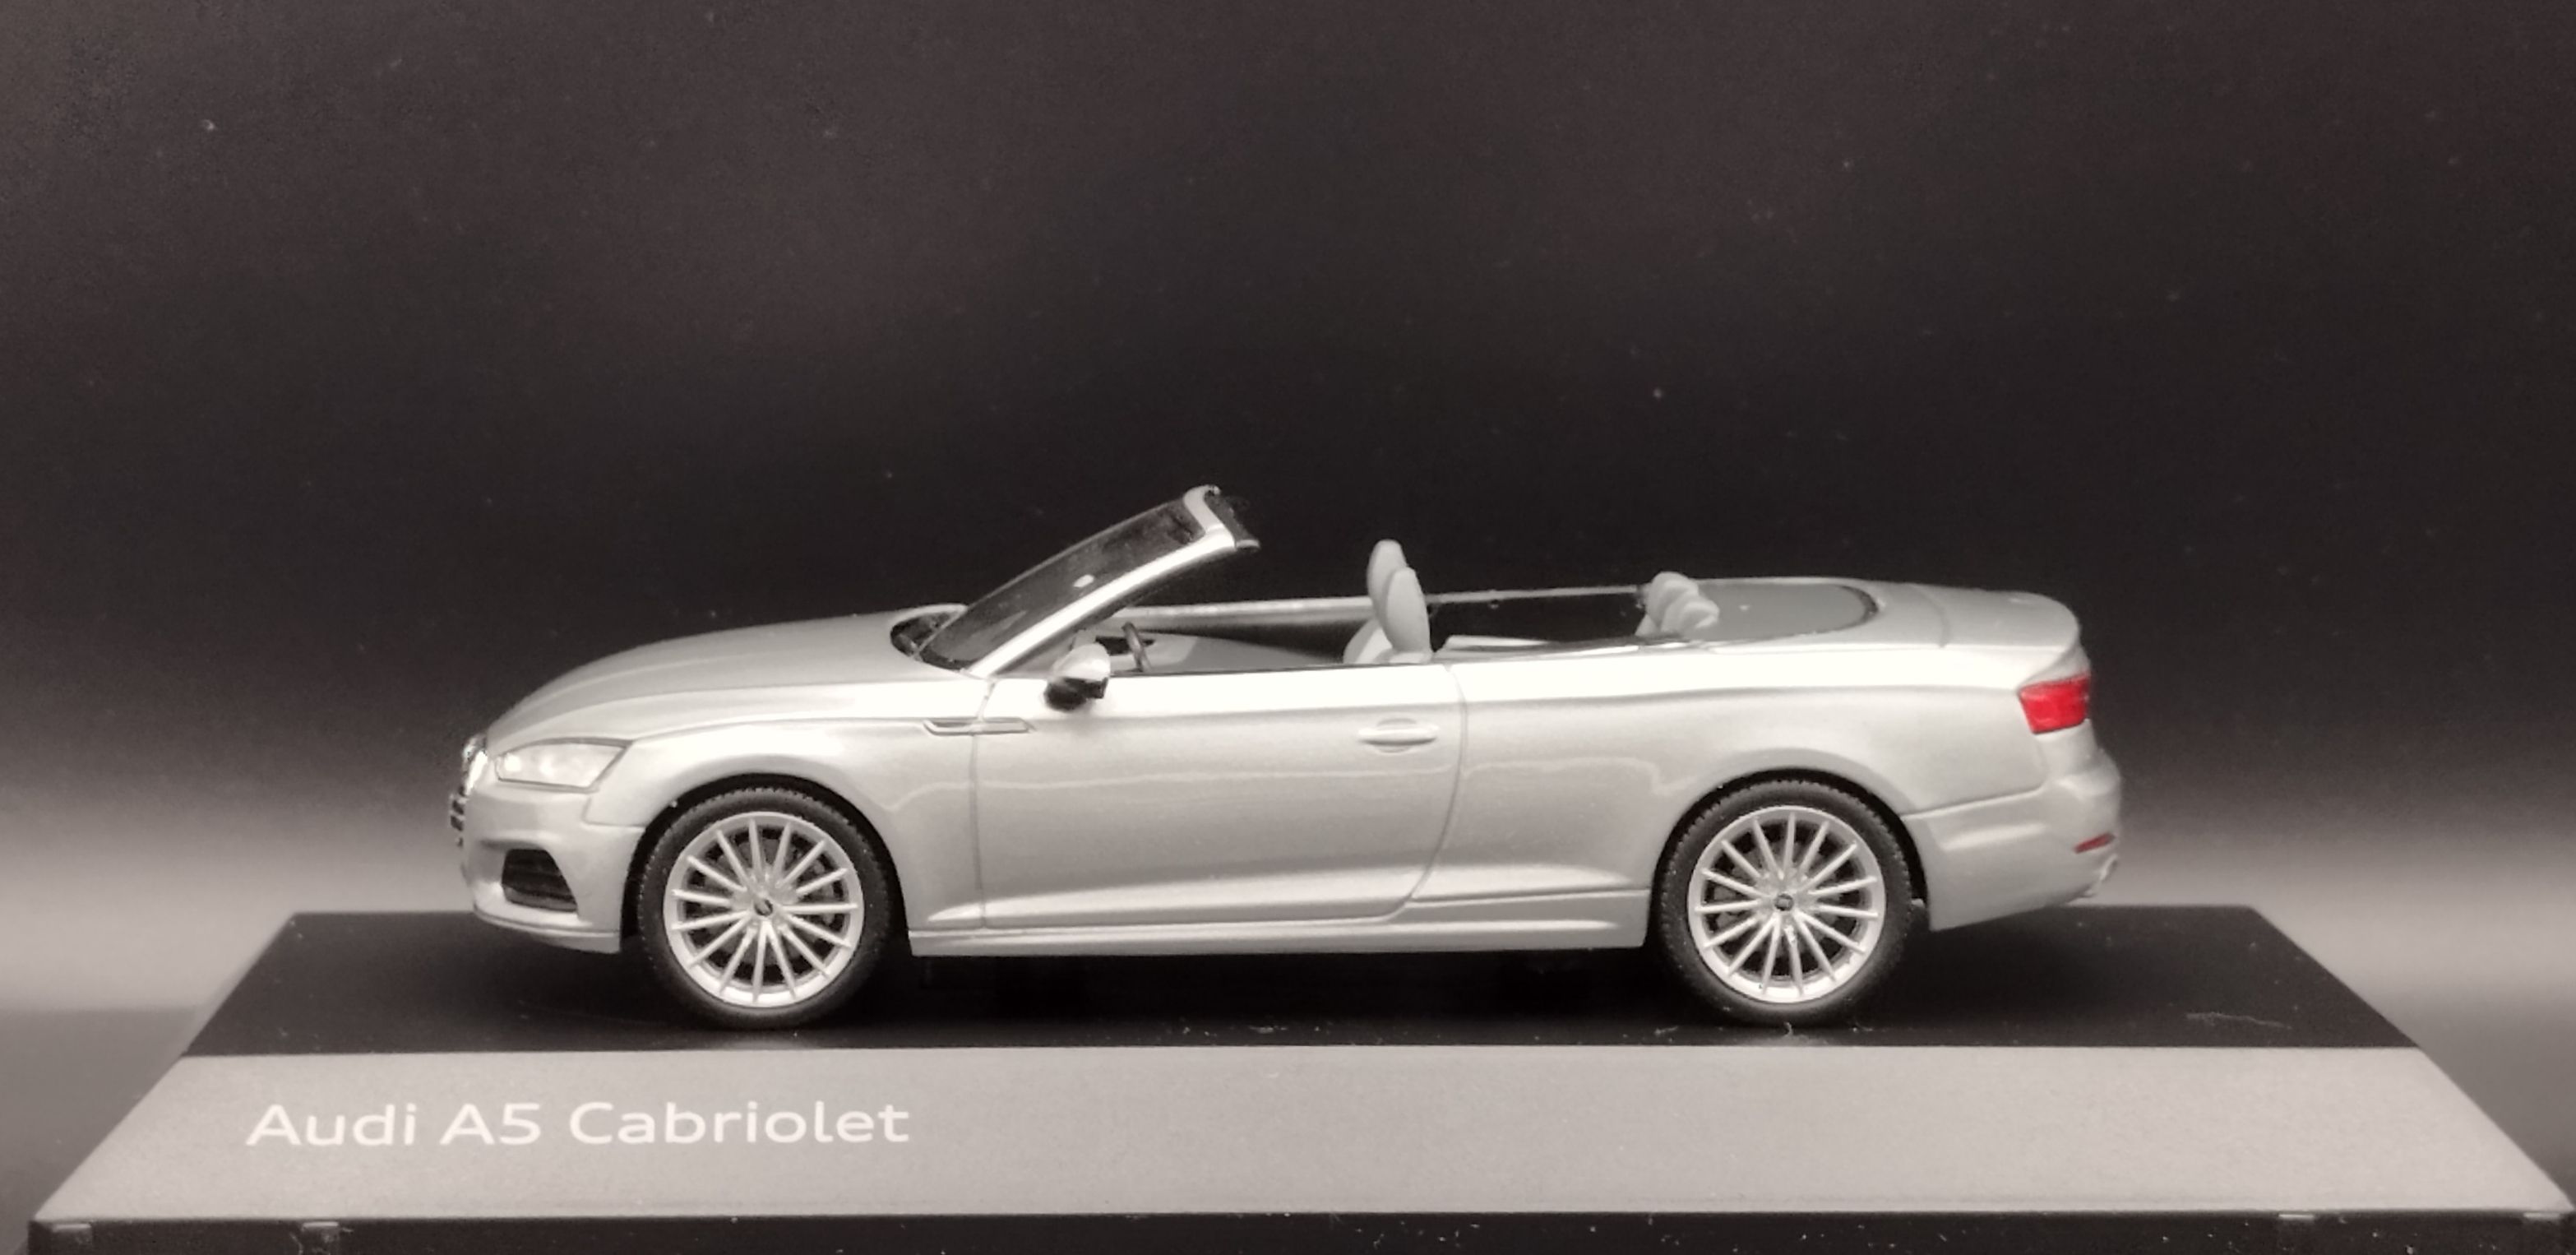 1:43 Spark Audi A5 cabriolet model nowy